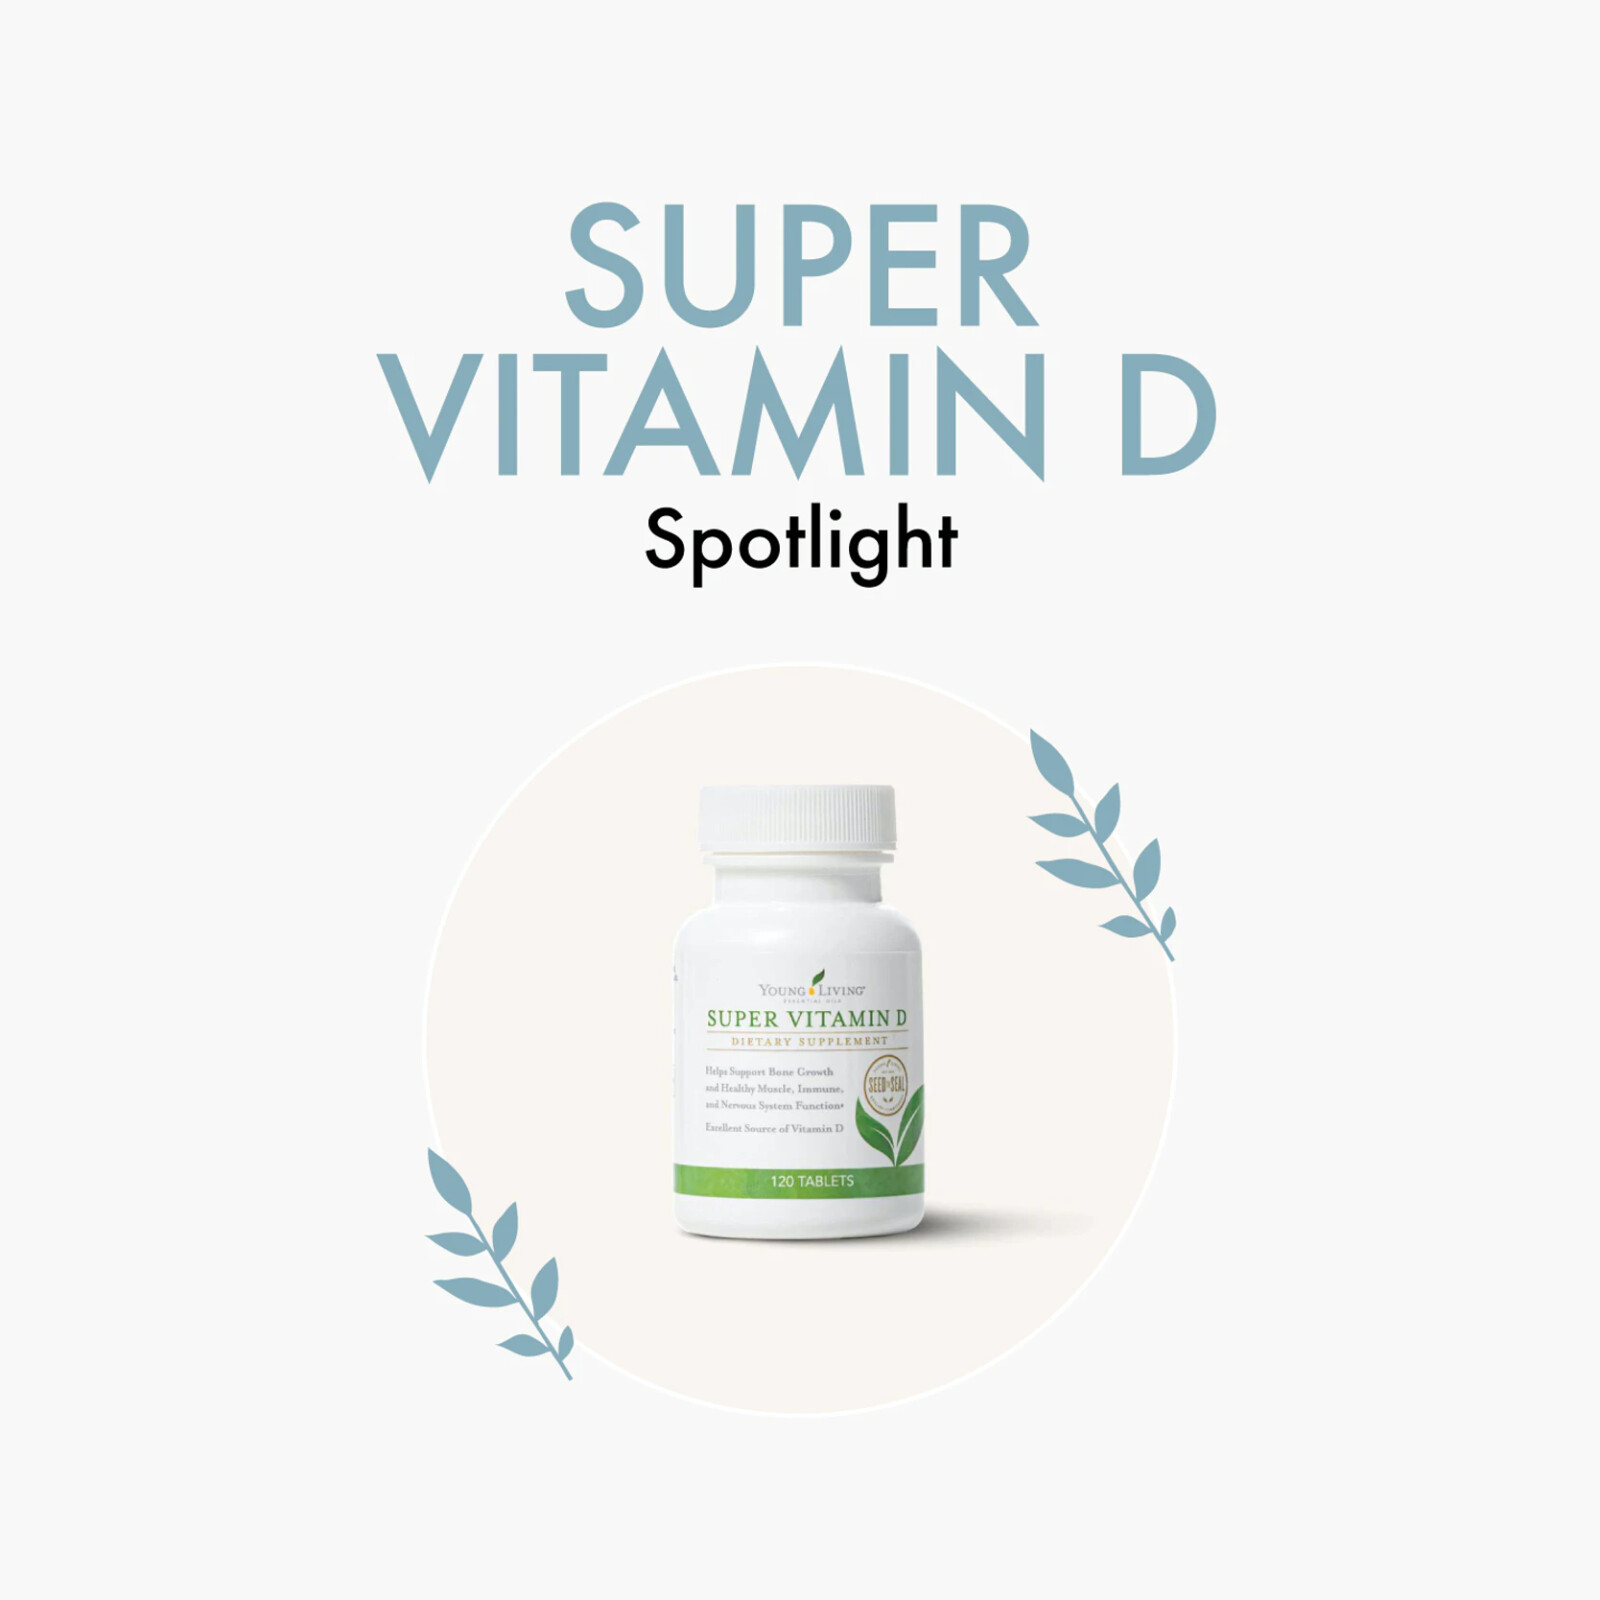 What’s The Deal About Vitamin D?